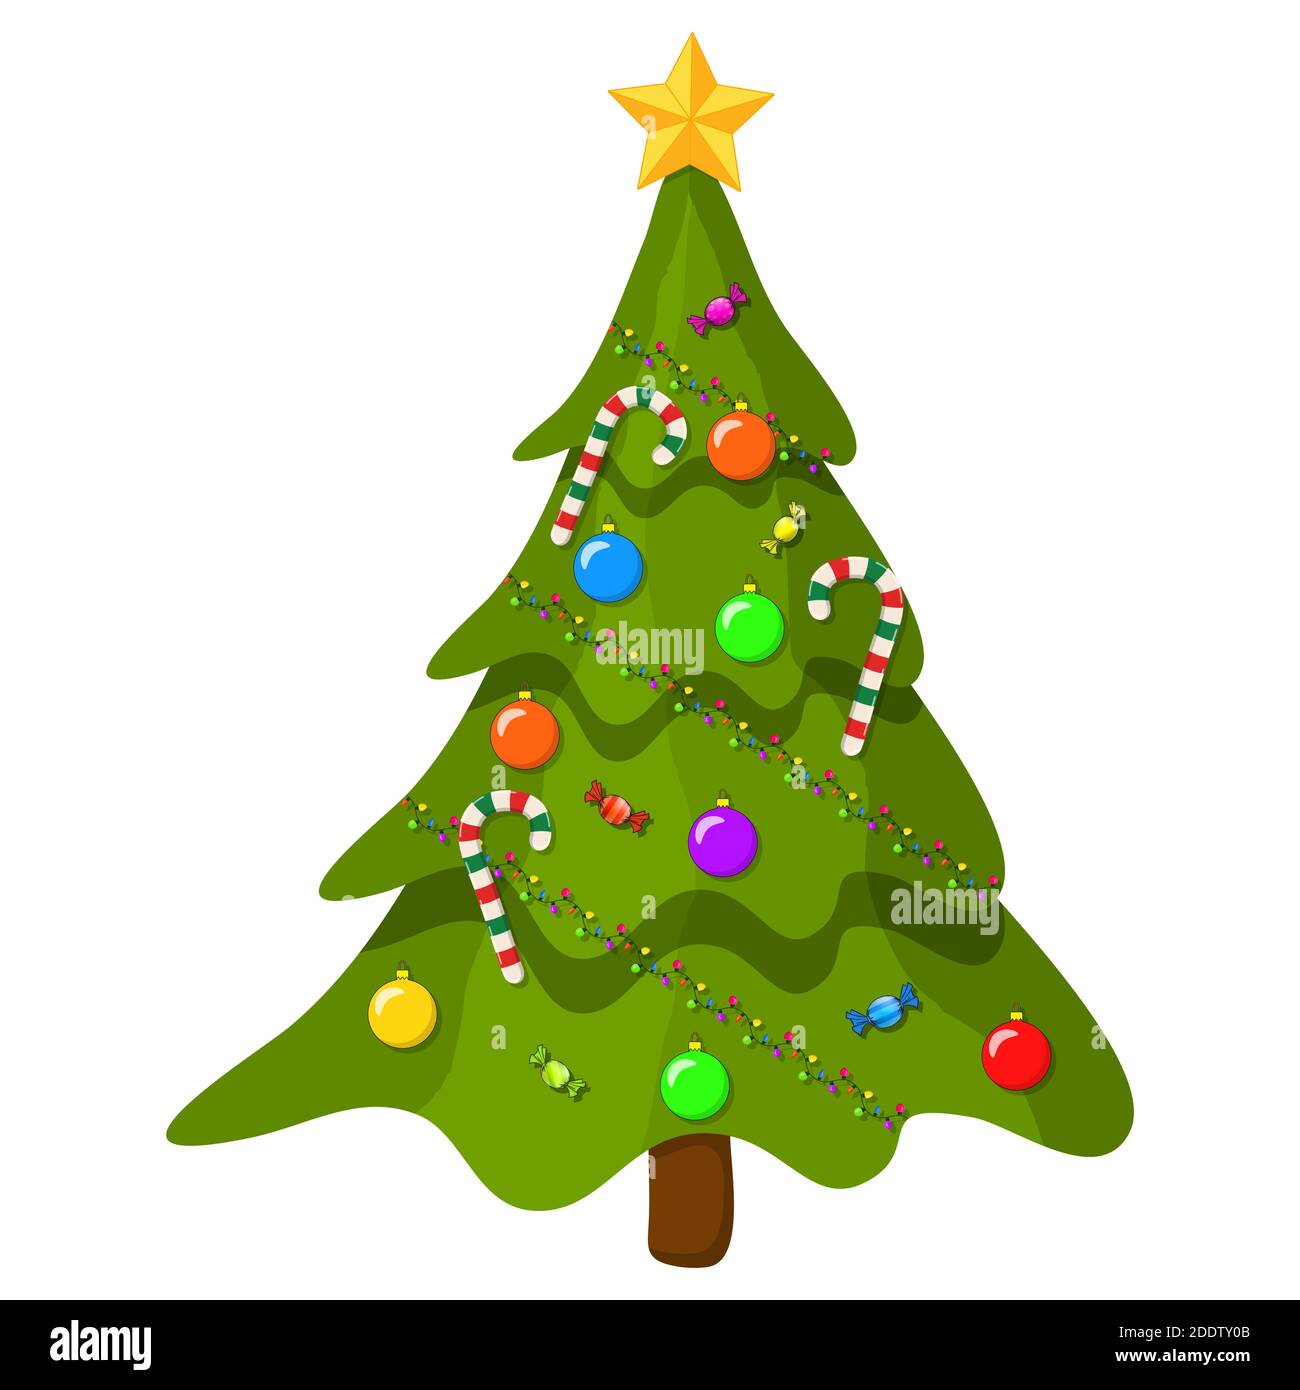 Christmas tree with ornaments. Cartoon illustration isolated on white background. Vector fir tree with hanging xmas decorations.Modern holiday evergre Stock Vector